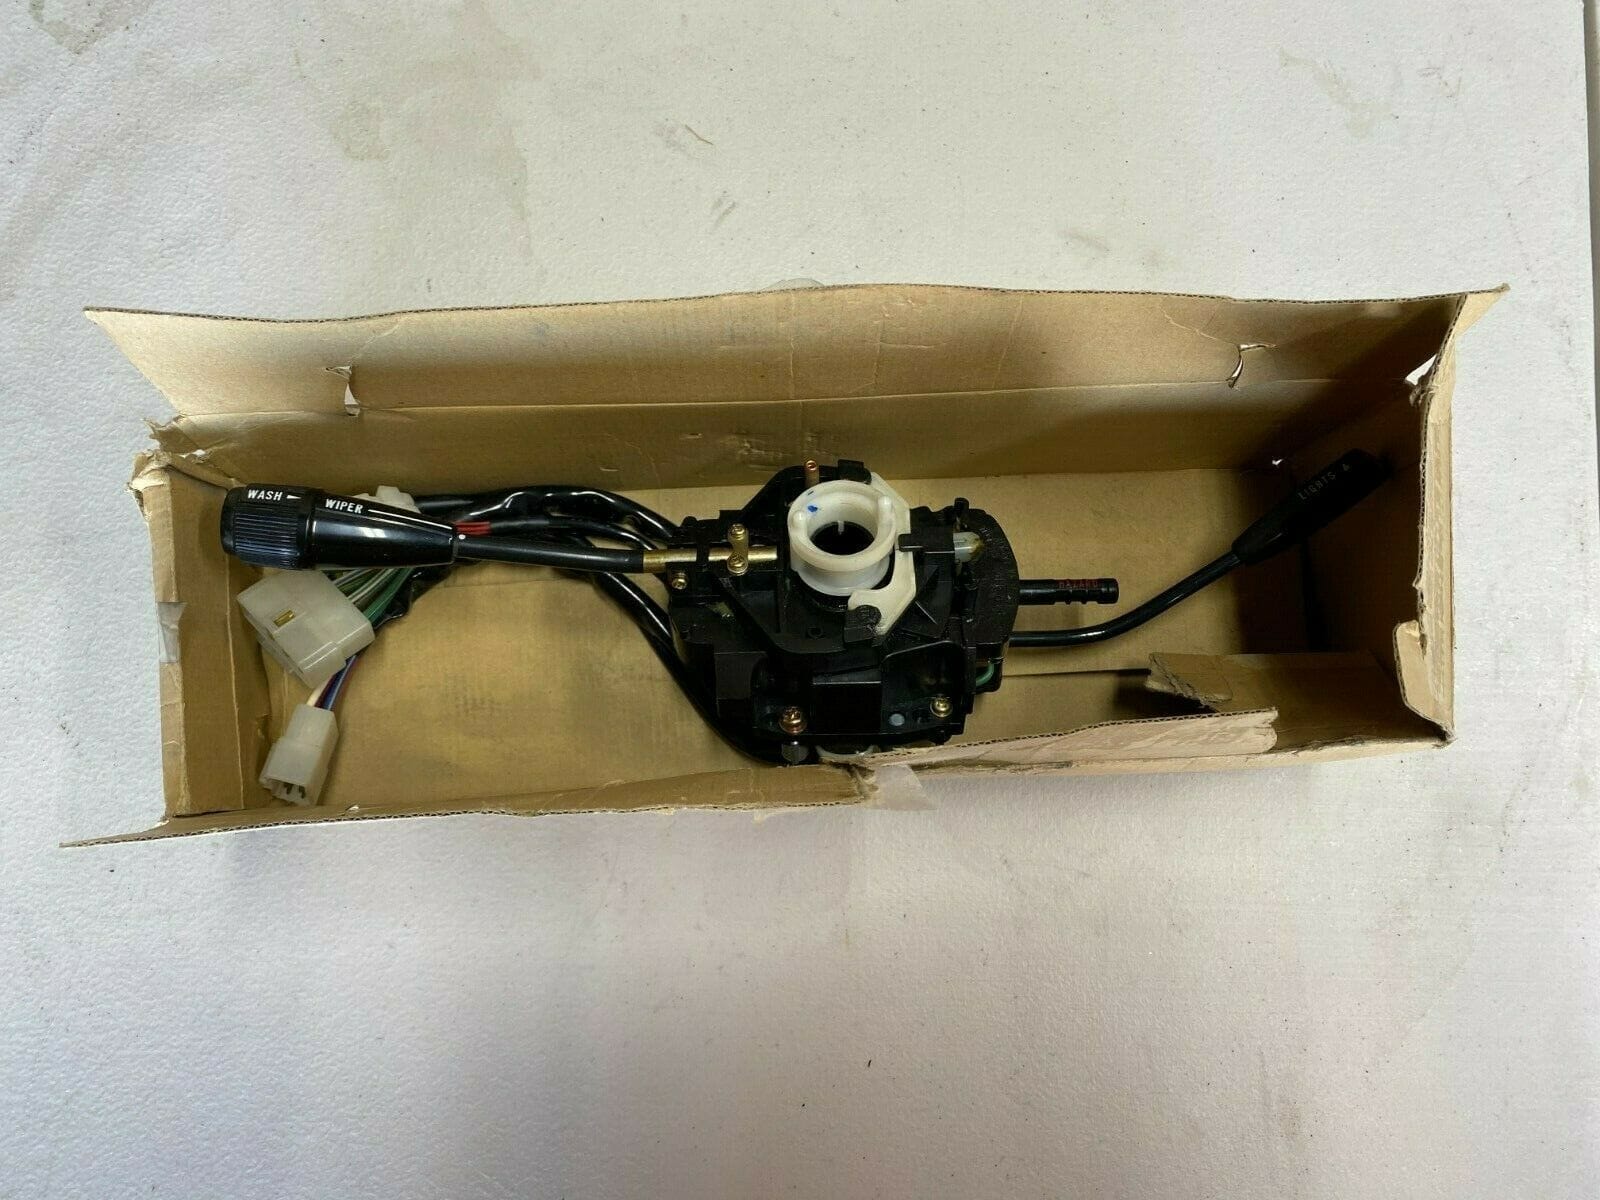 Interior/Upholstery - Mazda RX7 79-80 NOS Genuine Combination Switch (NEW) - New - 1979 to 1980 Mazda RX-7 - Los Angeles, CA 90067, United States